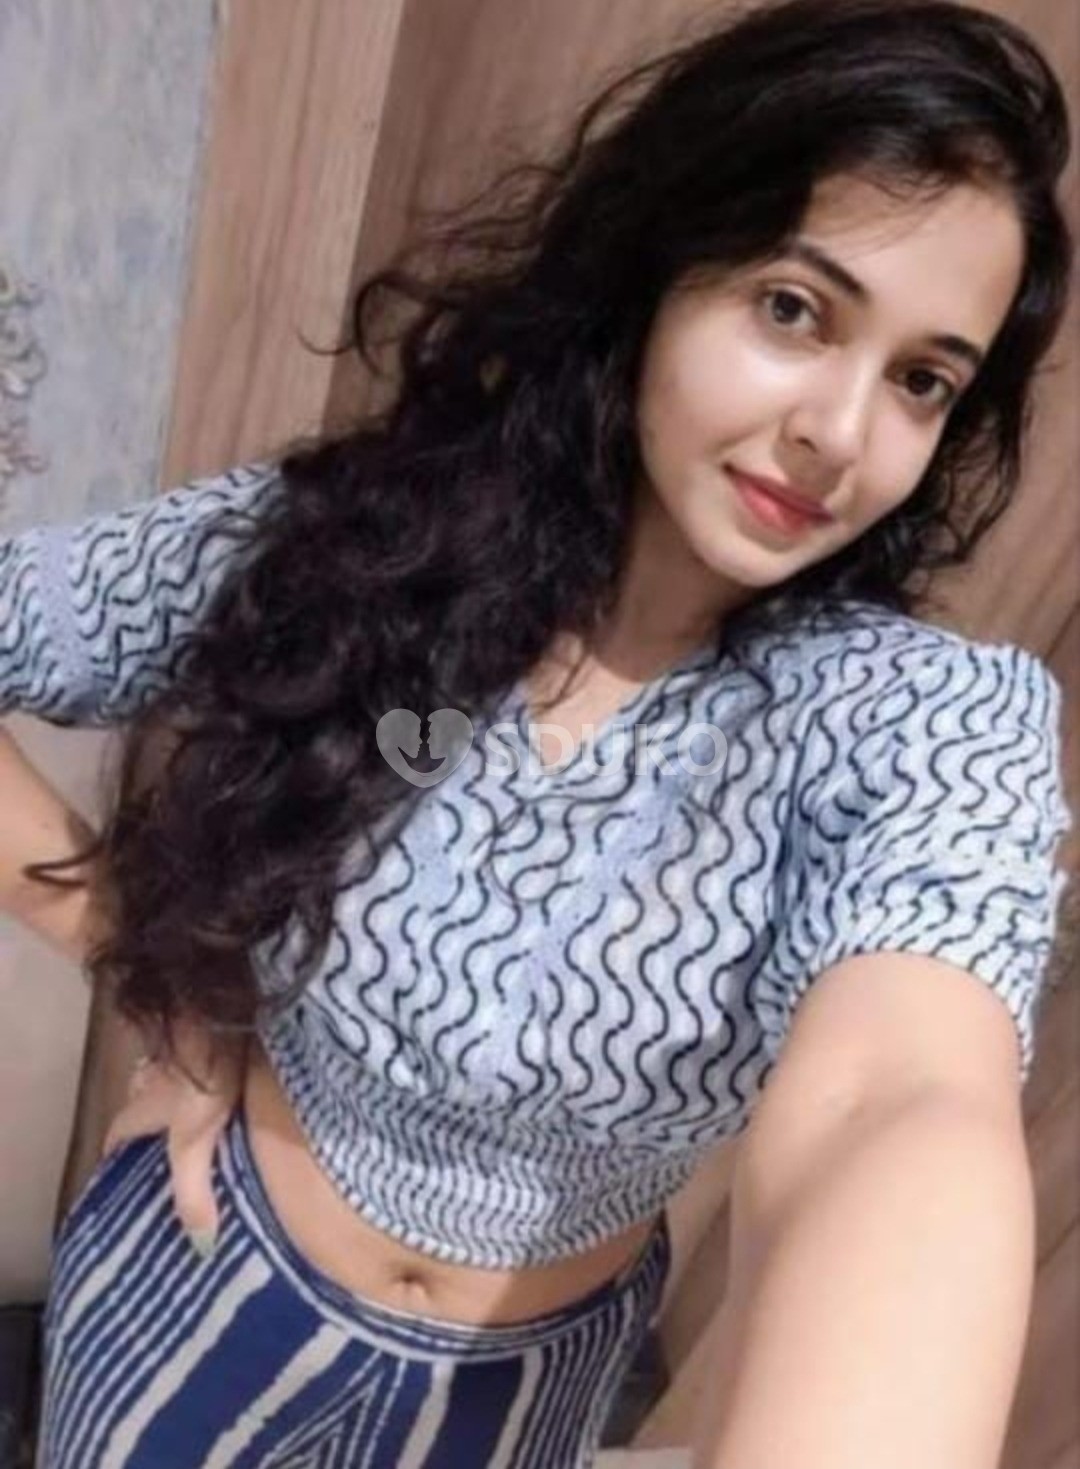 Coimbatore LOW PRICE🔸✅p( 24×7 ) SERVICE A AVAILABLE 100% SAFE AND S SECURE UNLIMITED ENJOY HOT COLLEGE GIRL HOUSEW